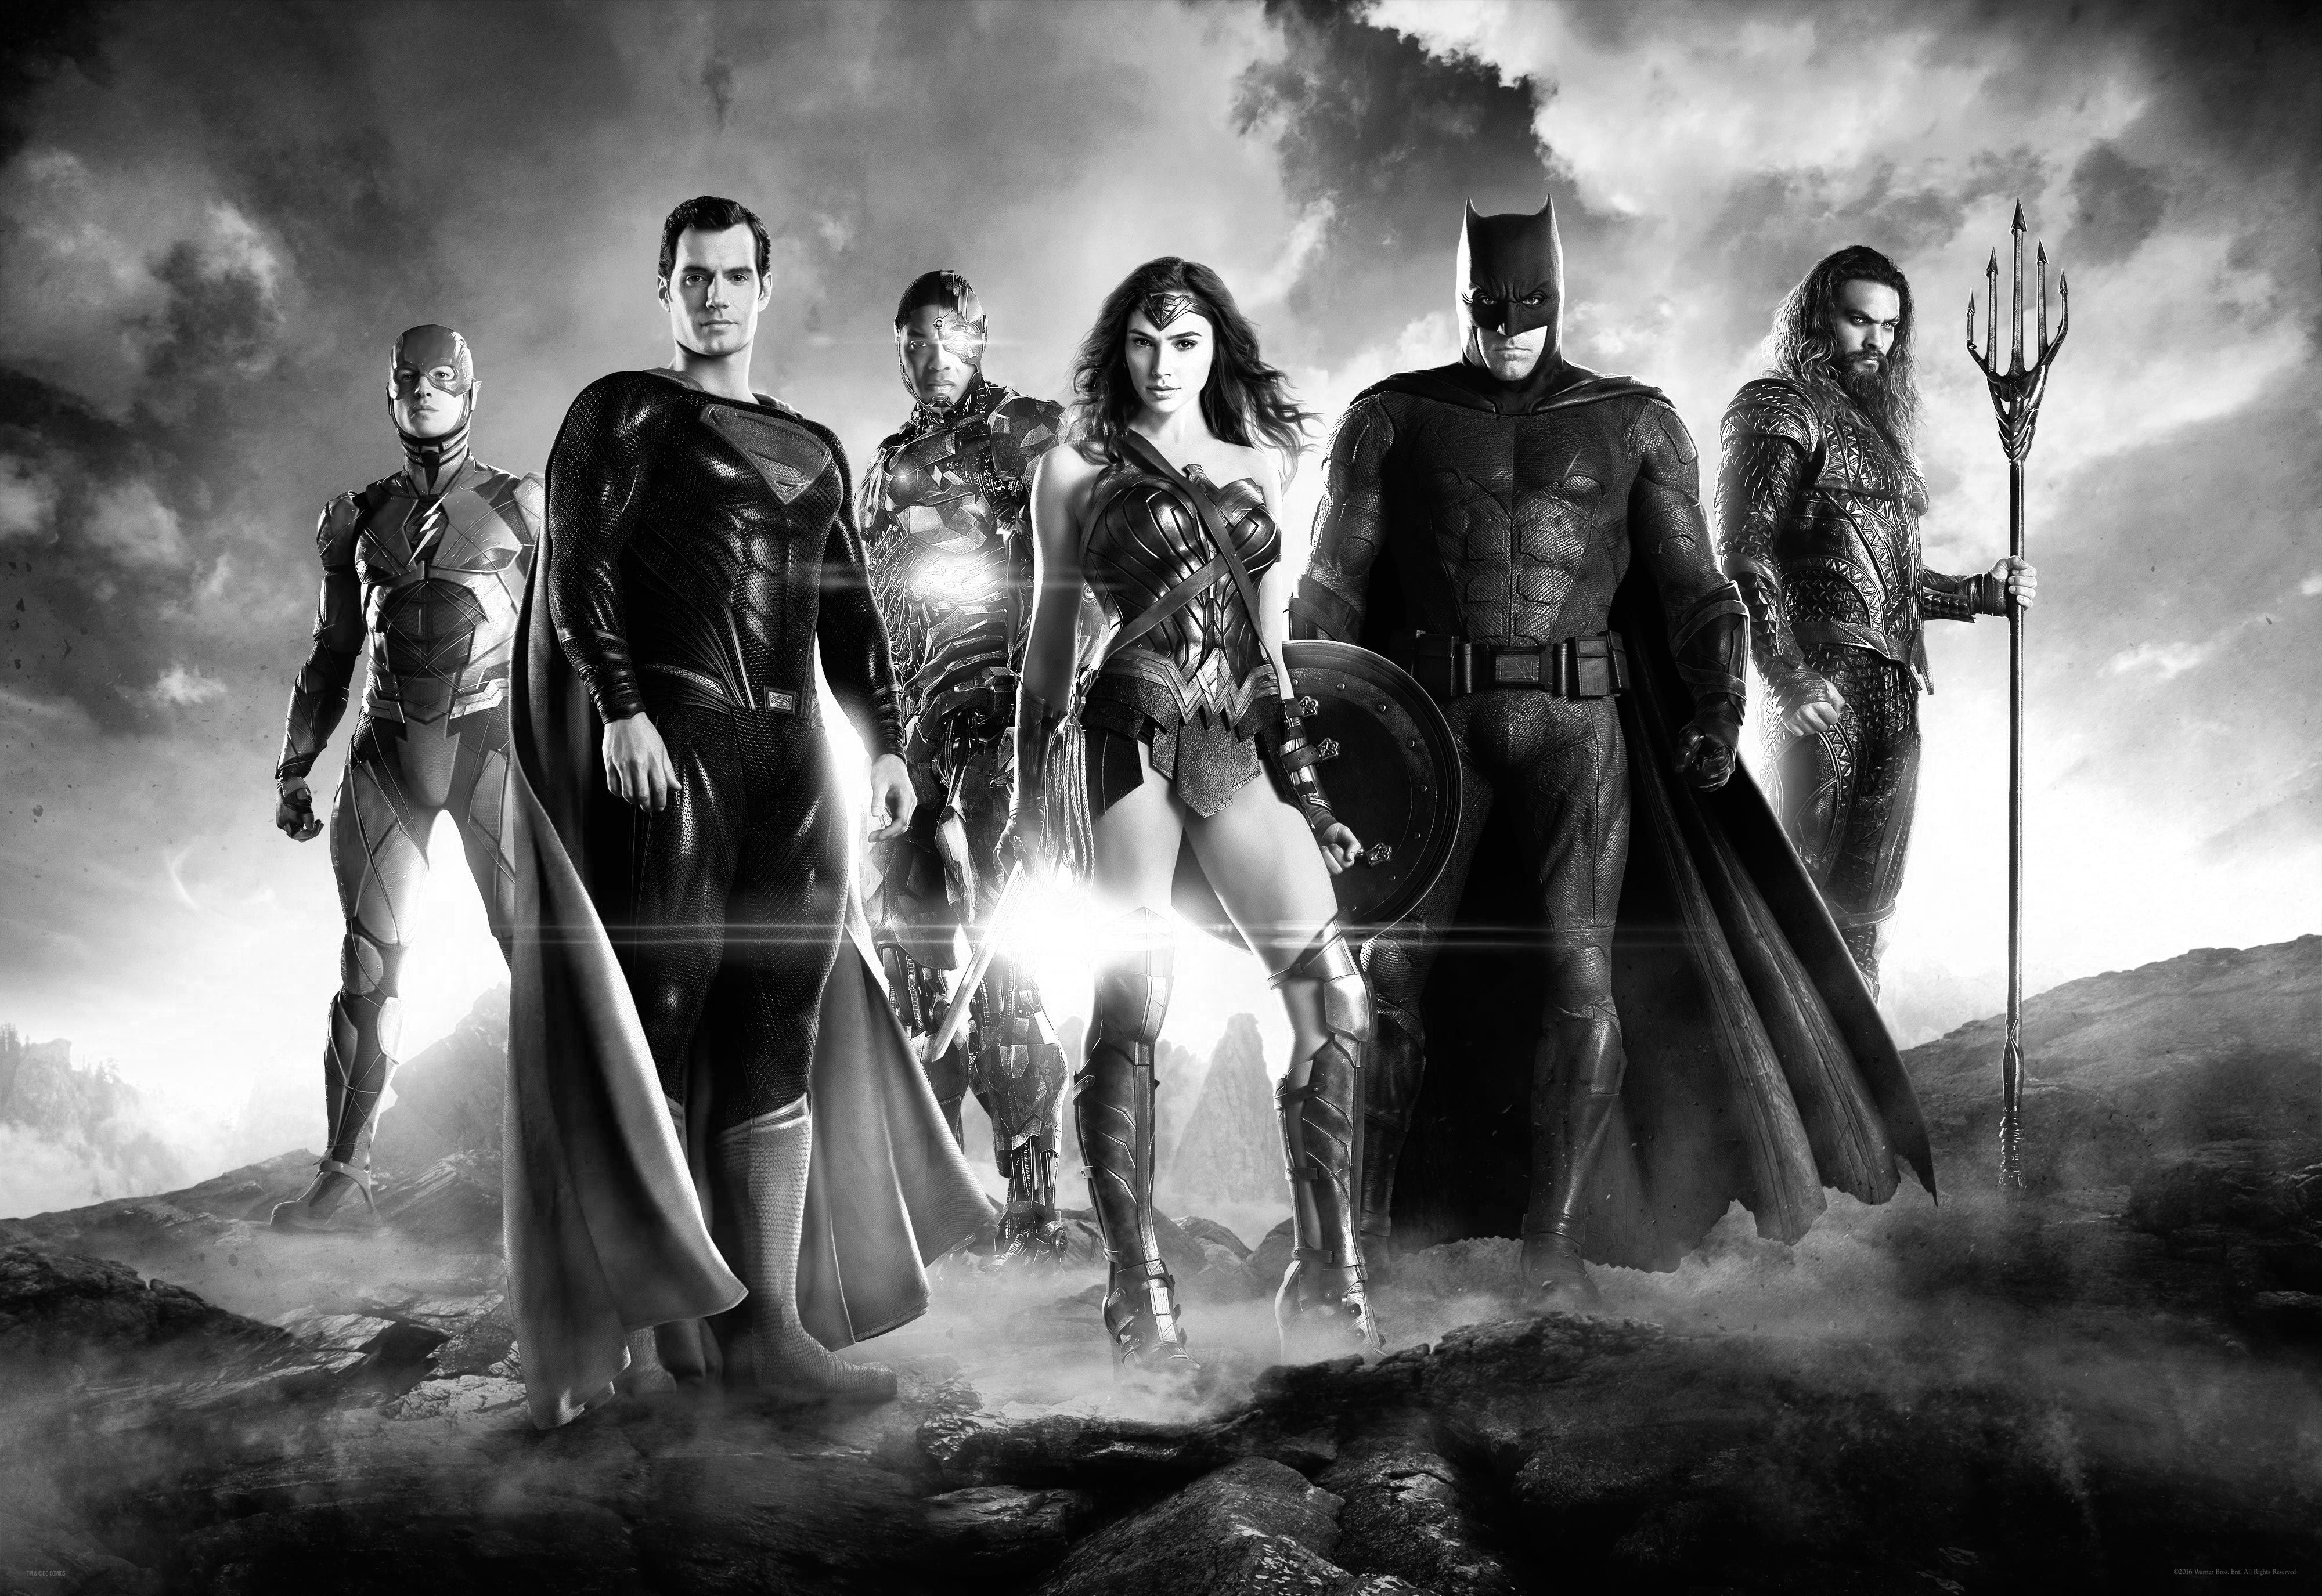 OTHER: Zack Snyder's Justice League textless monochrome wallpaper